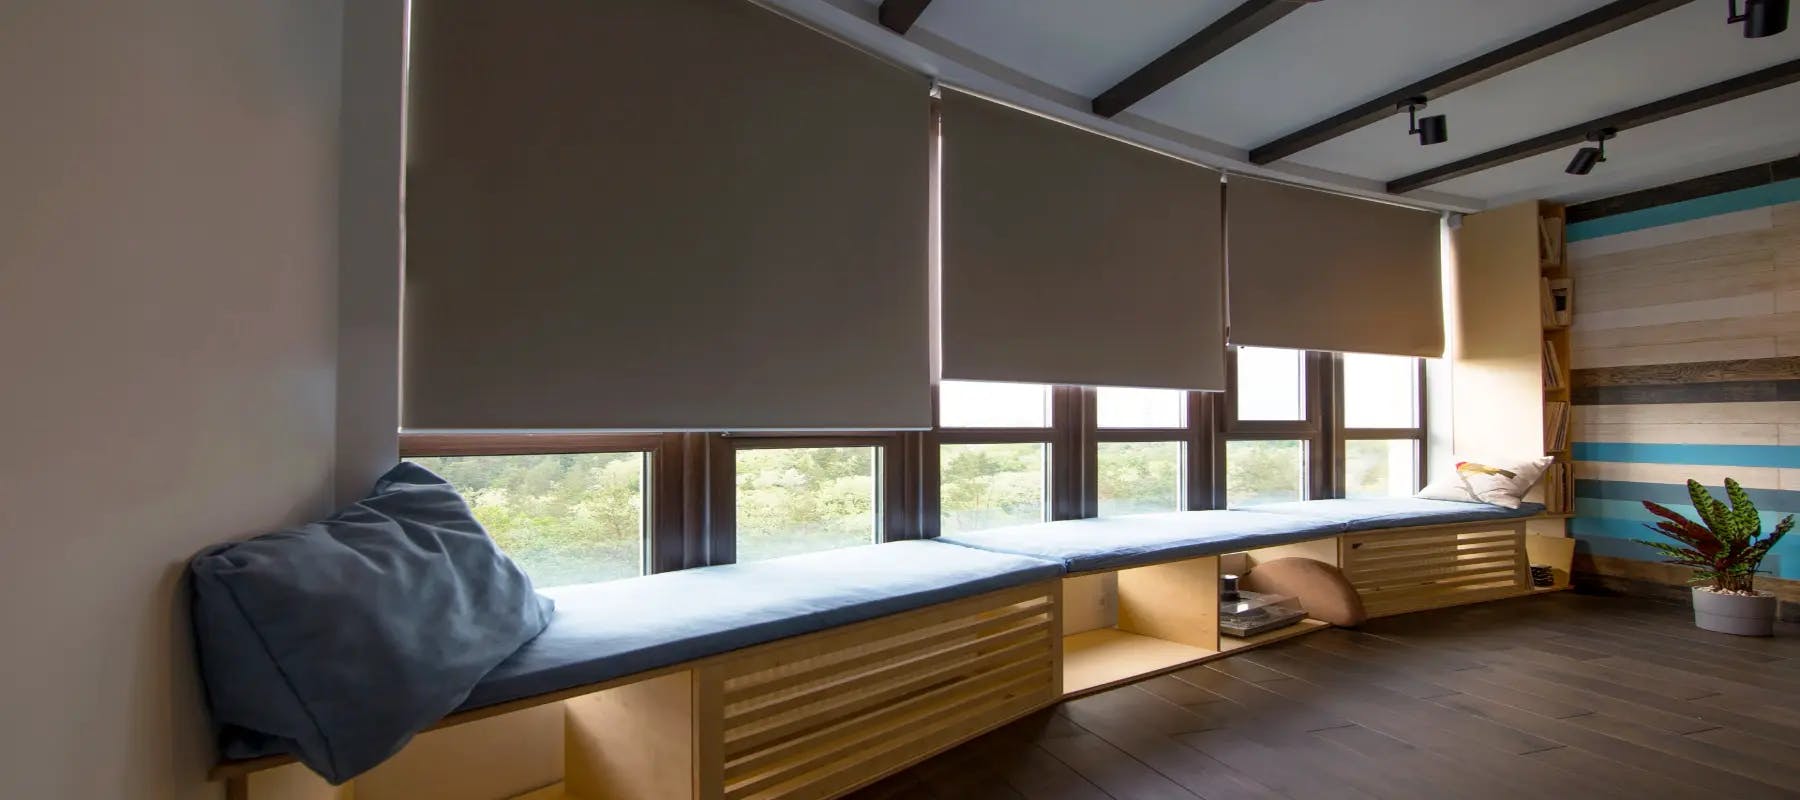 3 blinds rolled up in ascending order, letting in sunshine in the room and on the elongated window seat